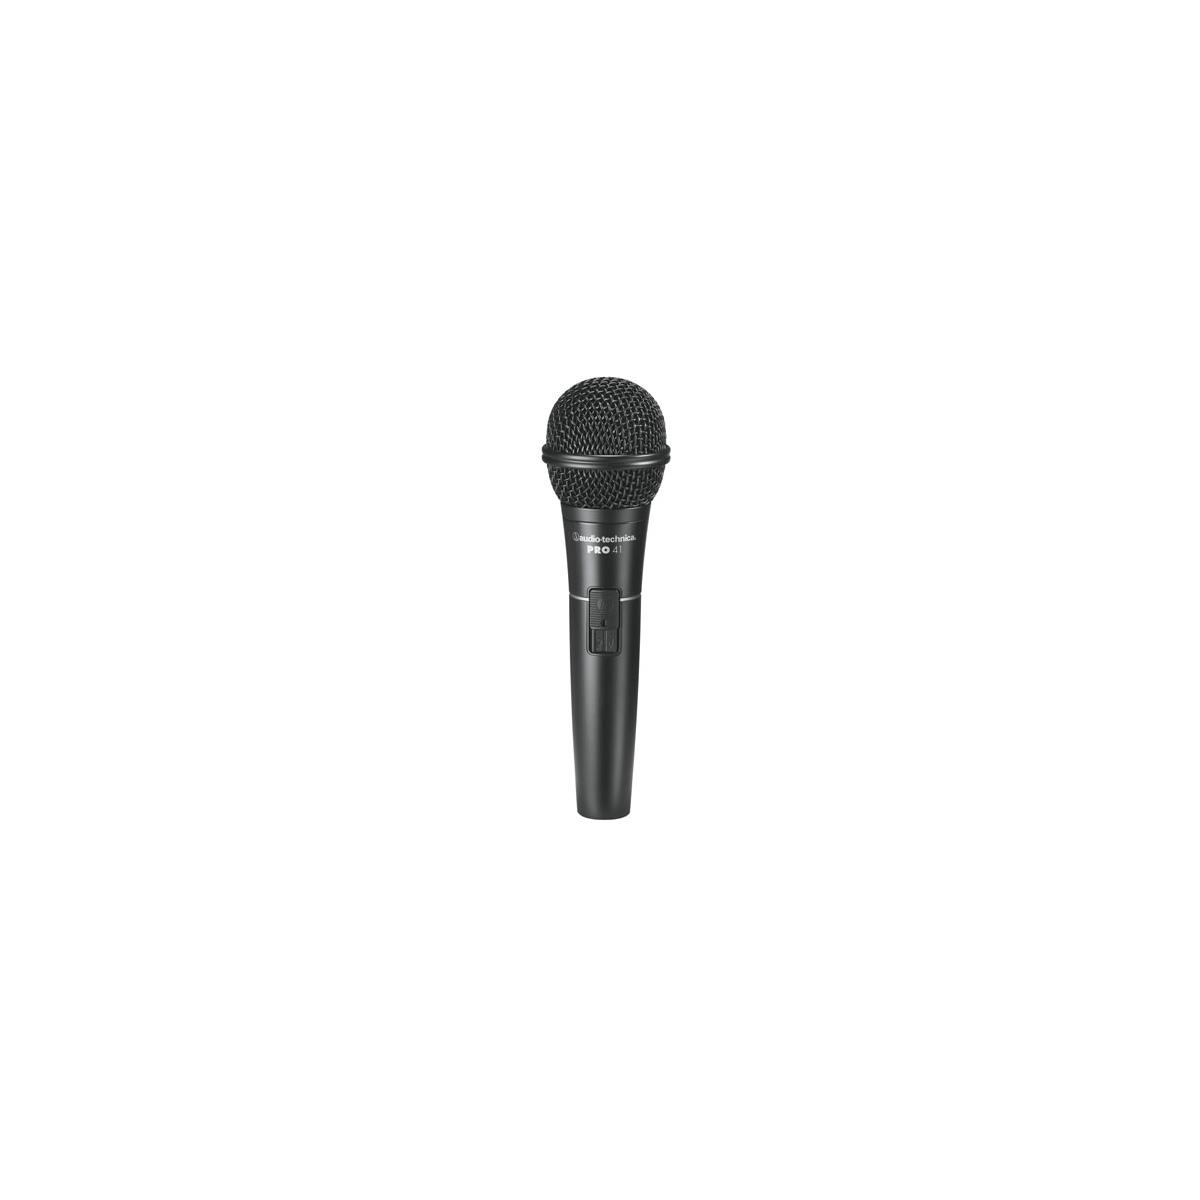 Image of Audio-Technica PRO41 Cardioid Dynamic Handheld Microphone